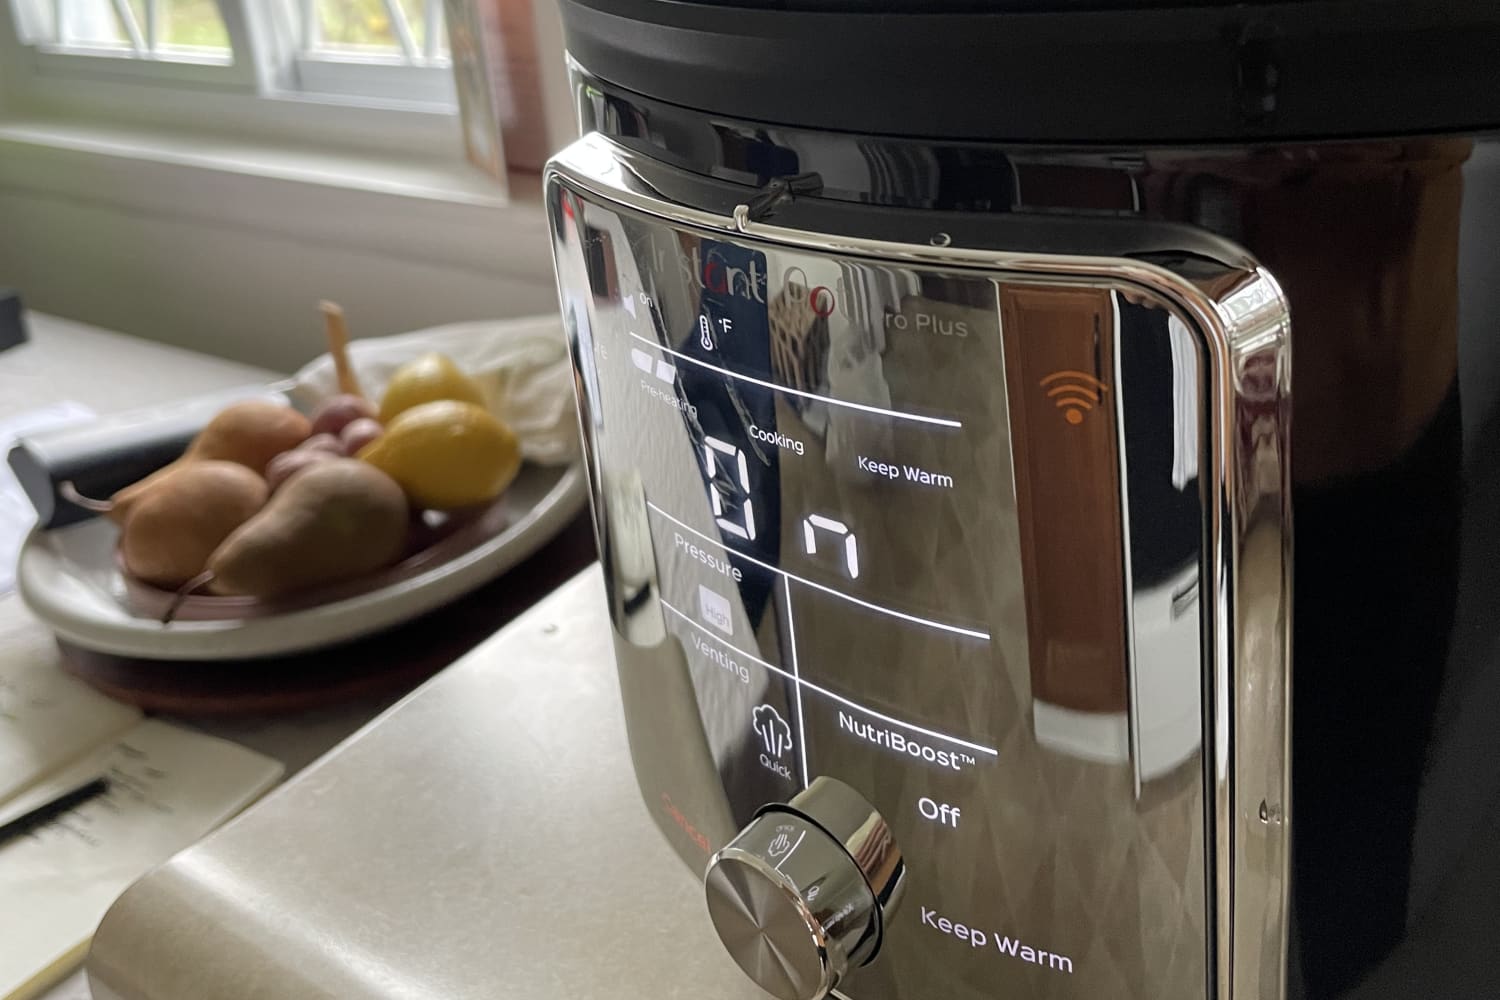 The Crock-Pot Lunch Crock Food Warmer Tested and Reviewed, Unboxing and  Product Reviews